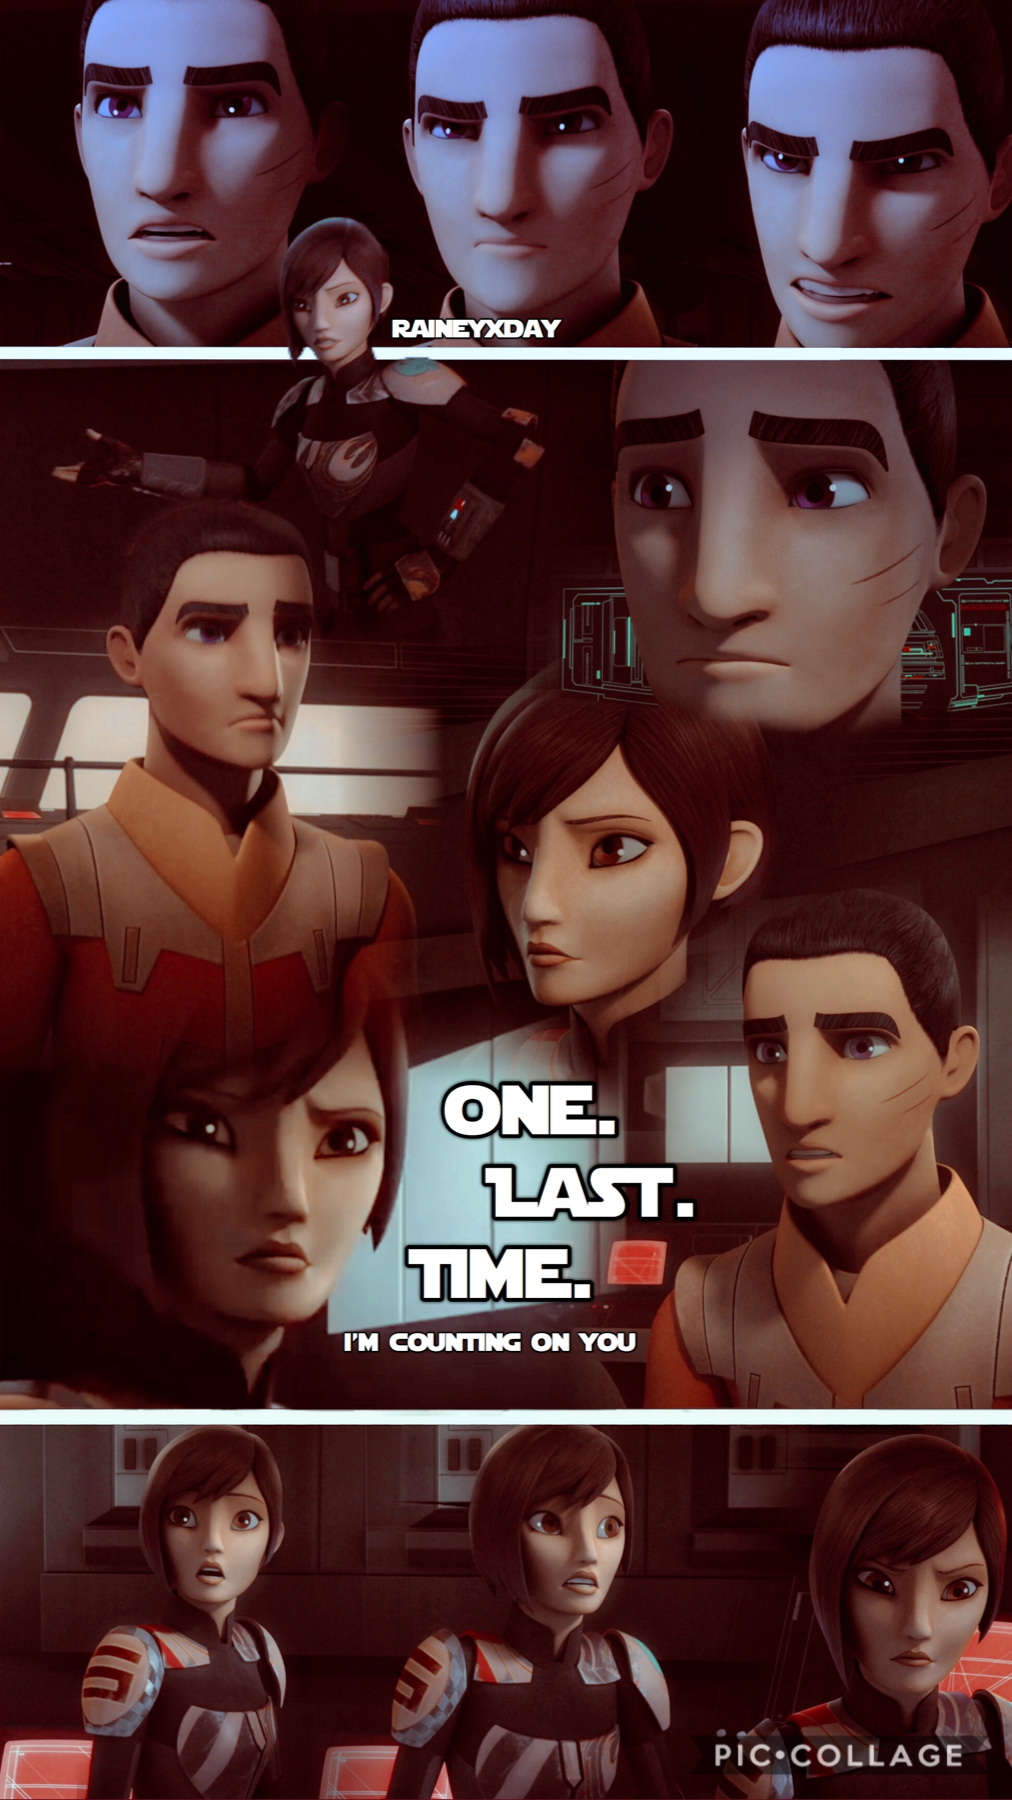 new BLEND edit (tap)

Info: Ezra & Sabine from Star Wars Rebels


Check me out on PicsArt!

@dancingintheraine for complex edits

&

@raineyxday for outline and blend edits


—————————————————————————